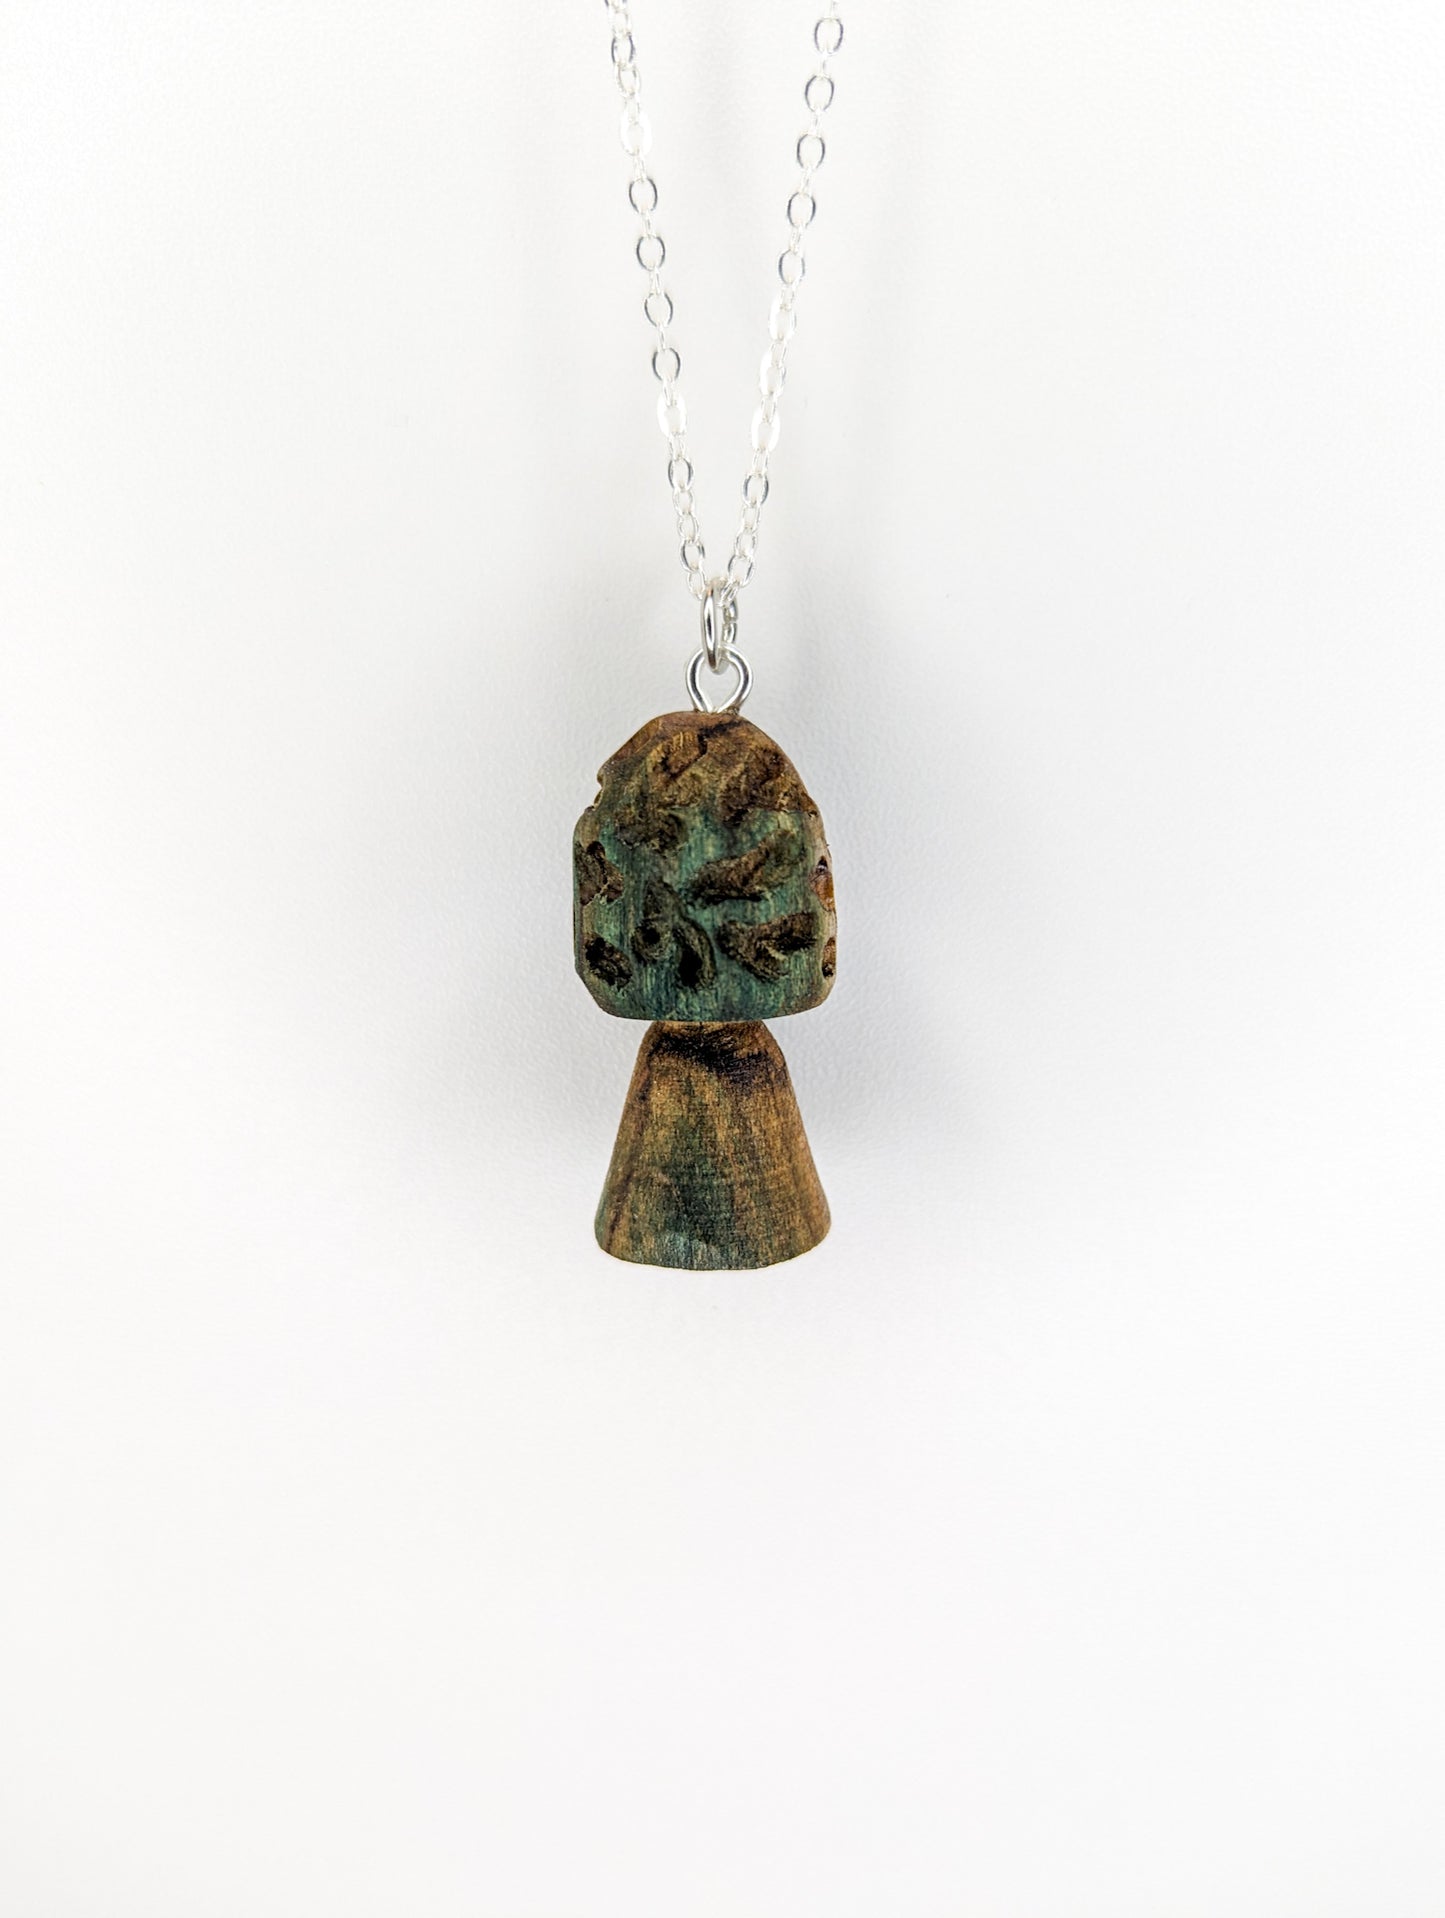 Hand Carved Morel Mushroom Pendant | Naturally Fungus-Stained Wood (Chlorociboria)